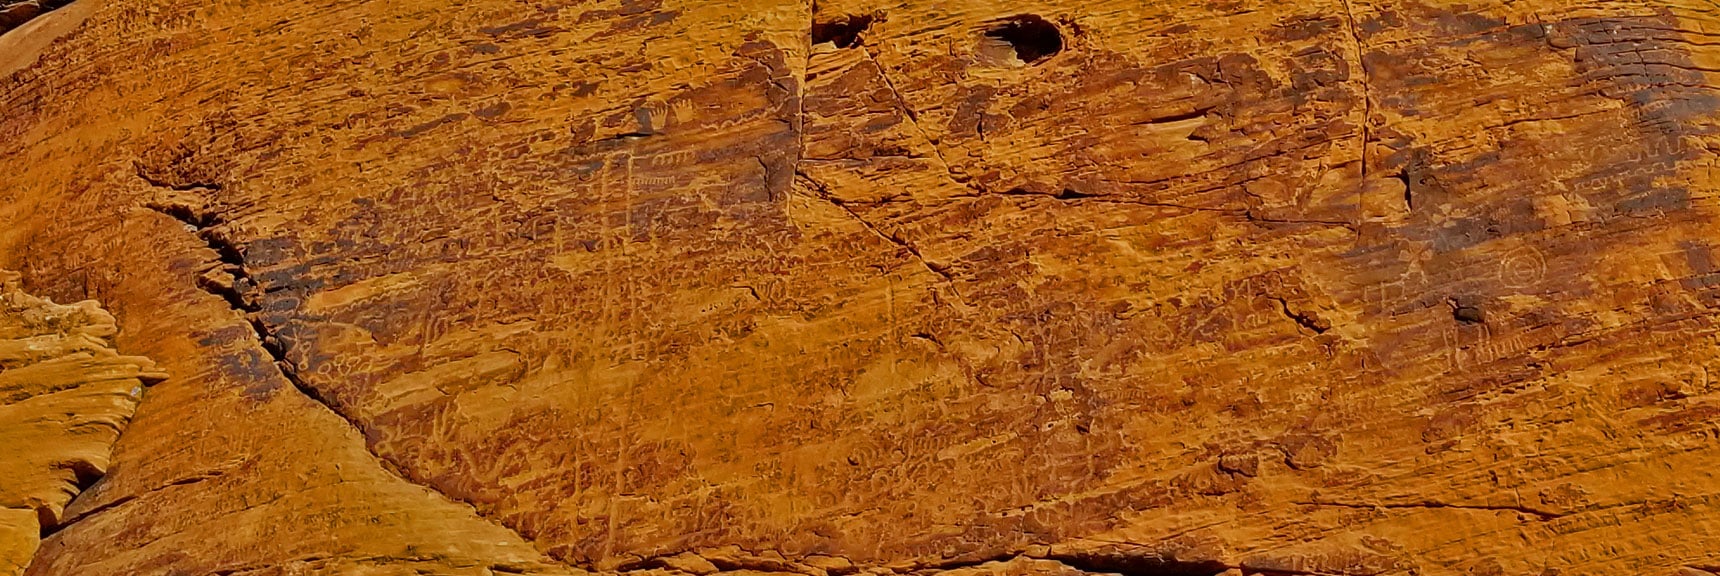 Petroglyphs on Mouse's Tank Trail in Valley of Fire State Park, Nevada, Slide 25